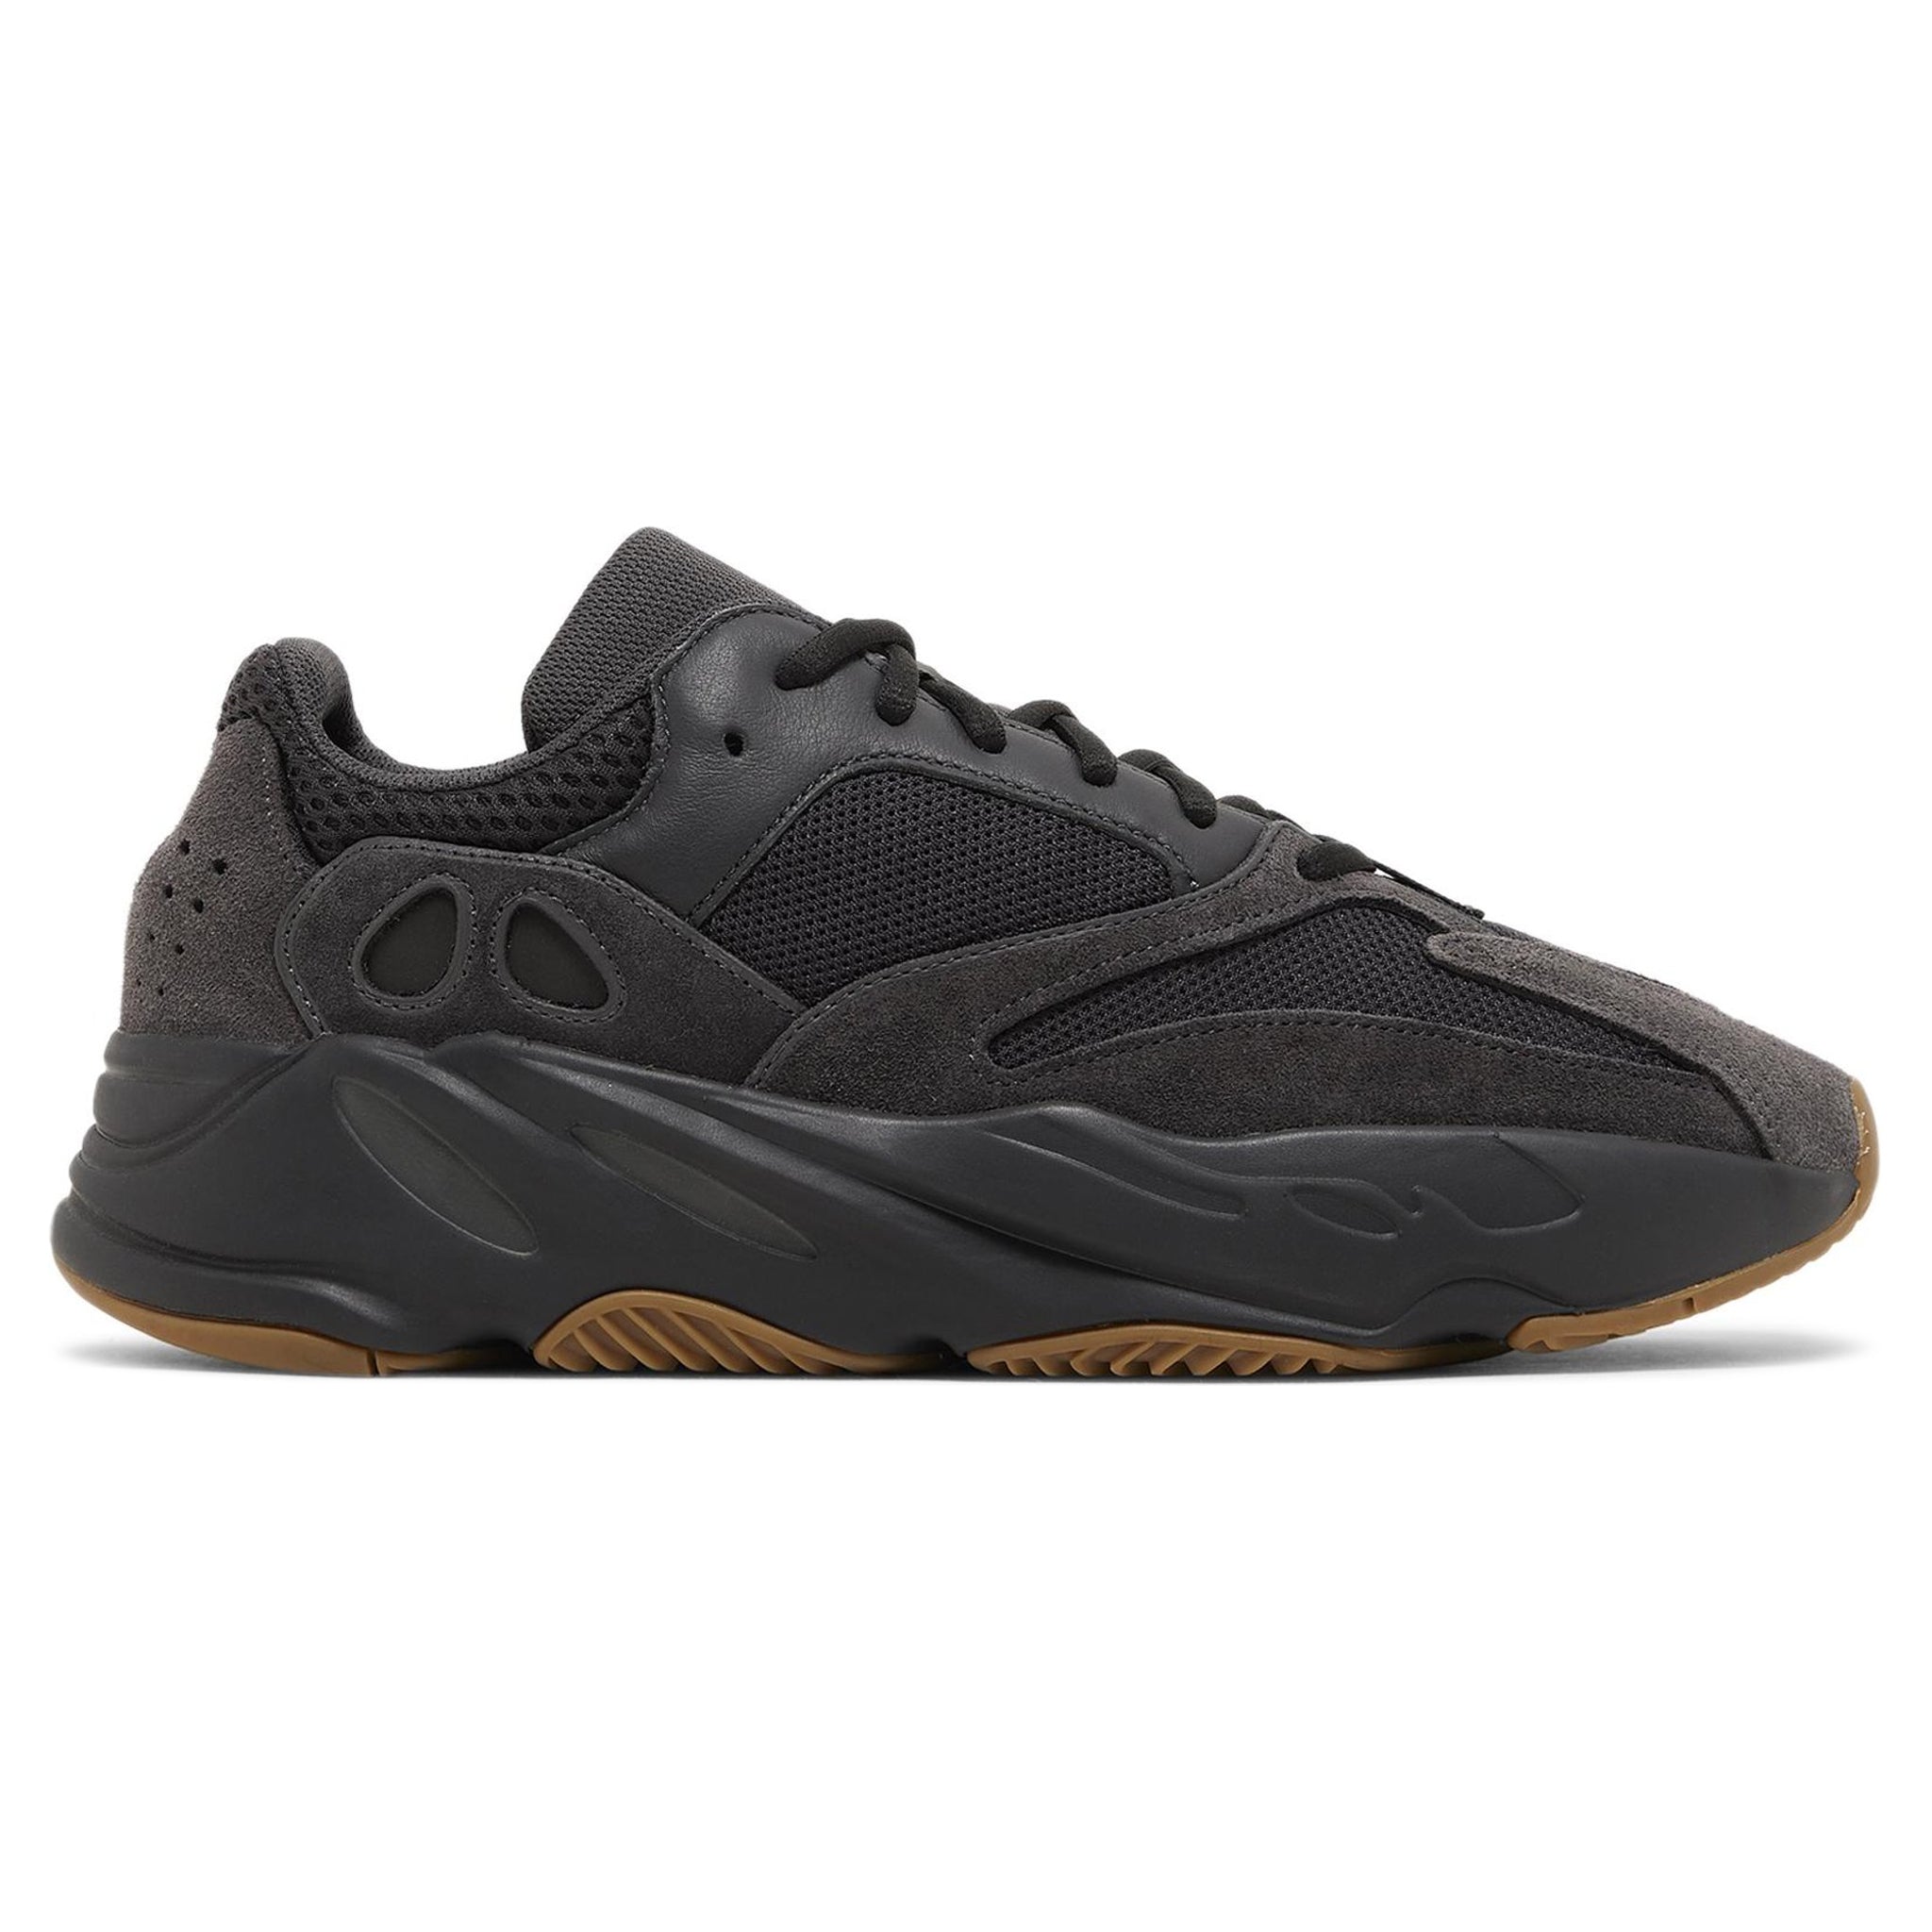 Side view of Adidas Yeezy Boost 700 Utility Black (2019/2023) FV5304 